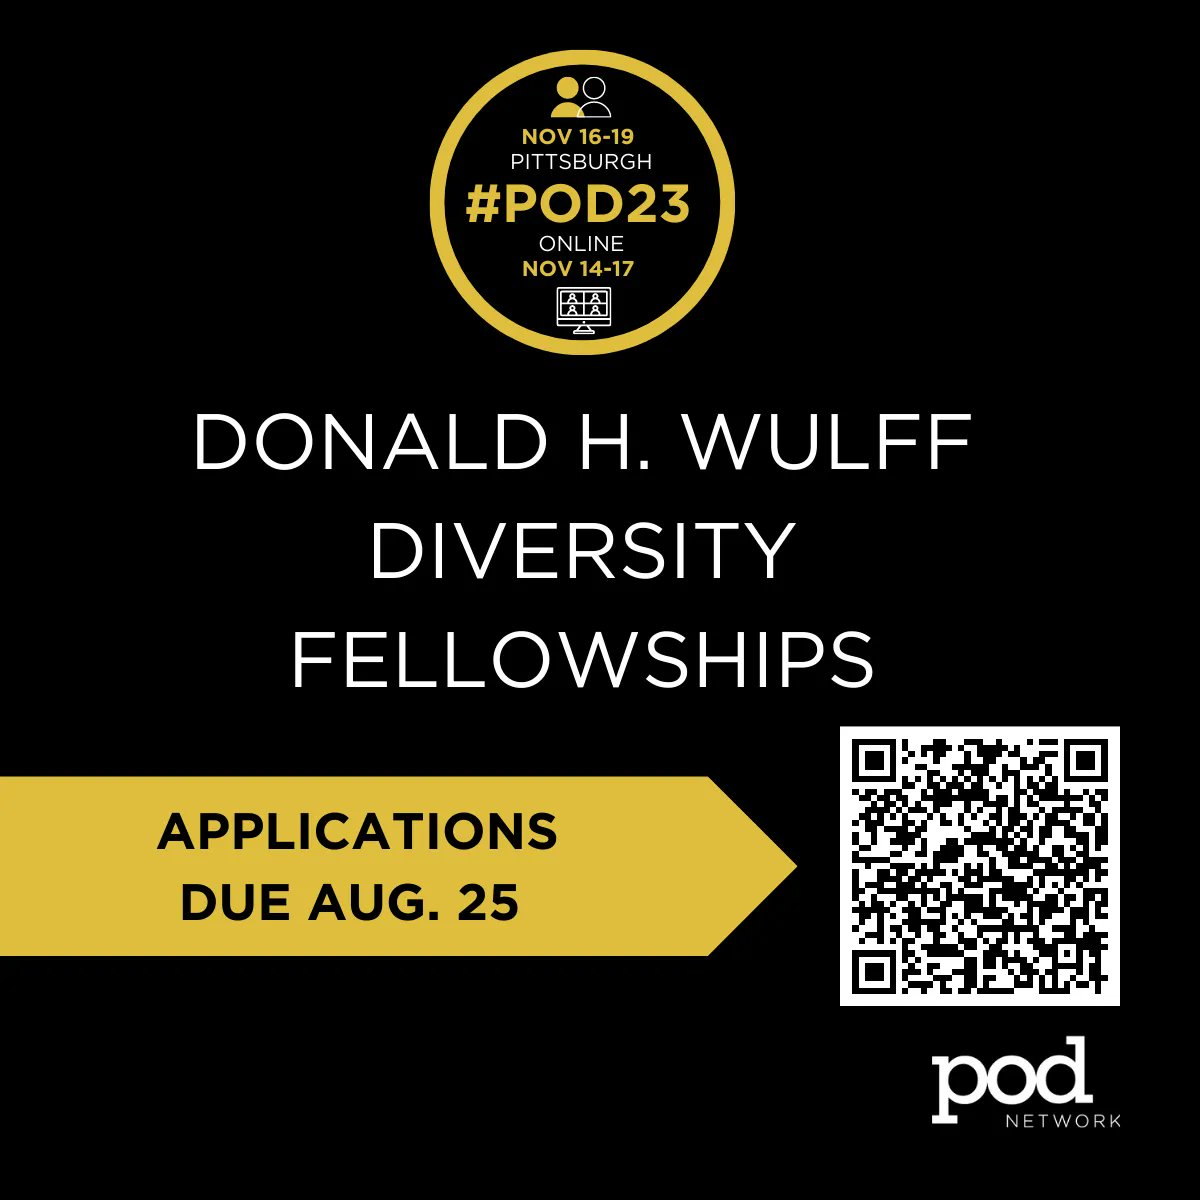 Need assistance attending the 48th Annual Conference? The Donald H. Wulff Diversity Fellowship aims to increase & support the participation of individuals from historically underrepresented groups in the field of educational development. Applications are due August 25! #POD23